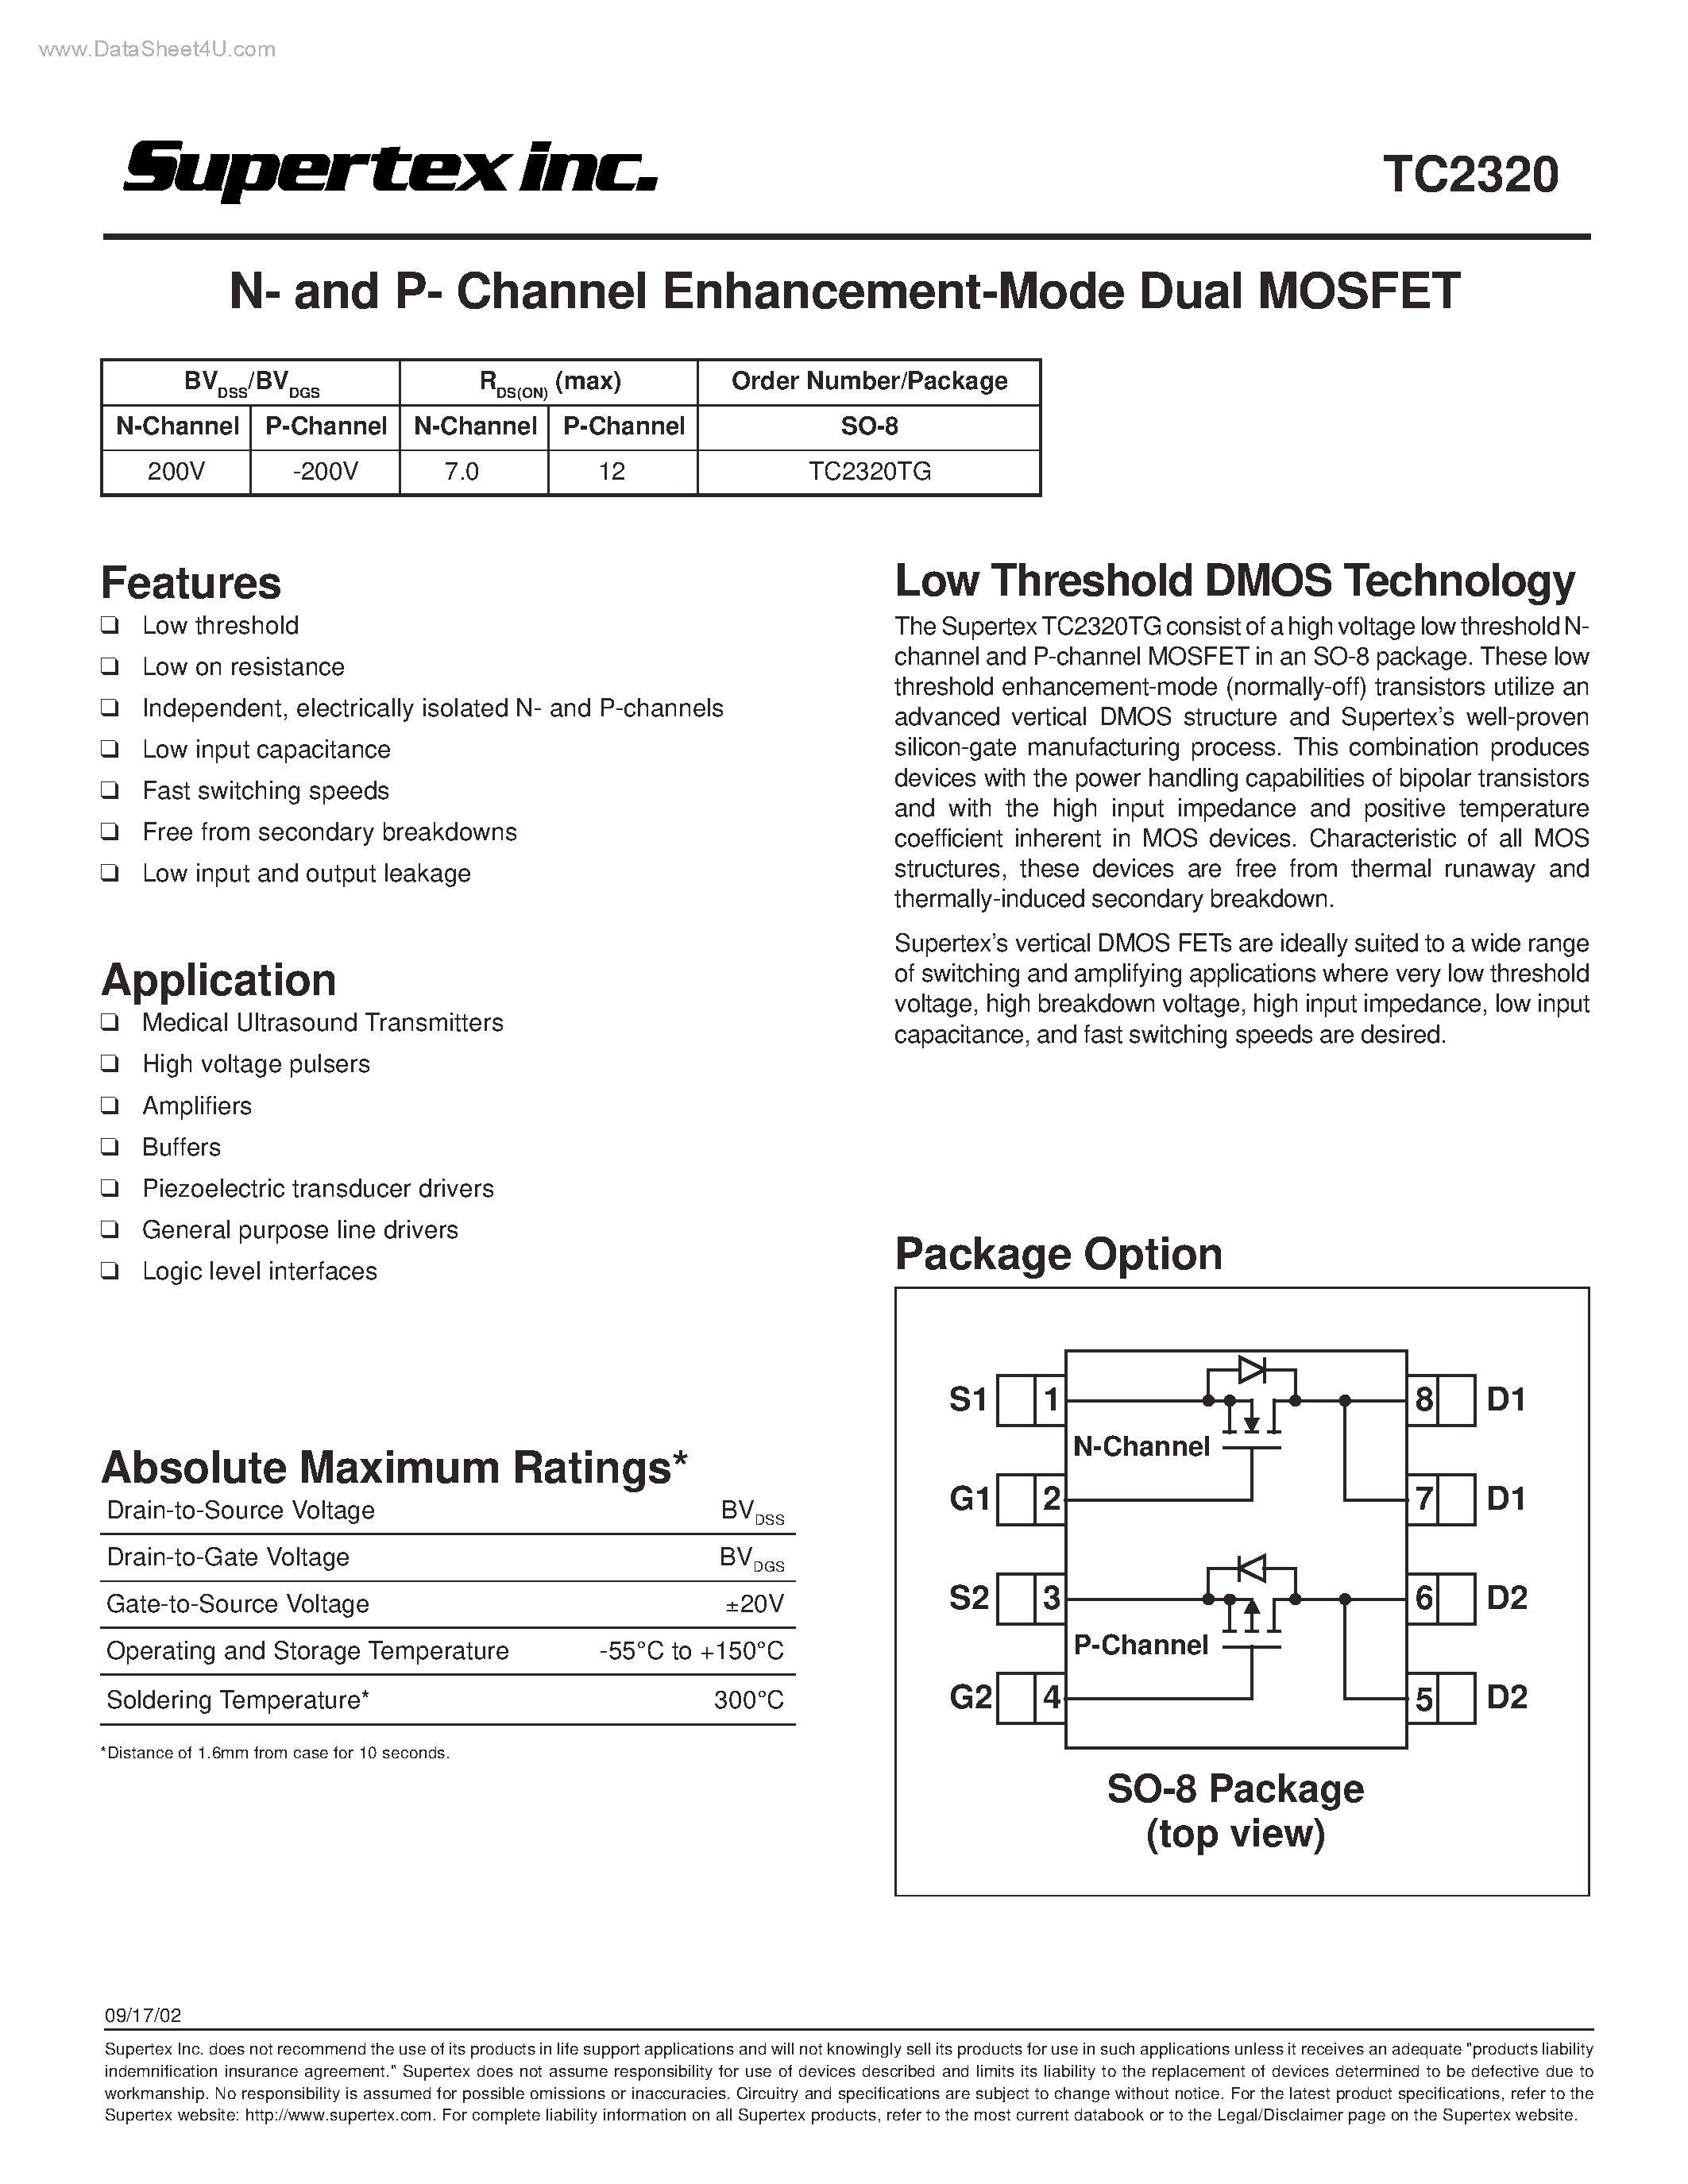 Даташит TC2320 - N- and P- Channel Enhancement-Mode Dual MOSFET страница 1